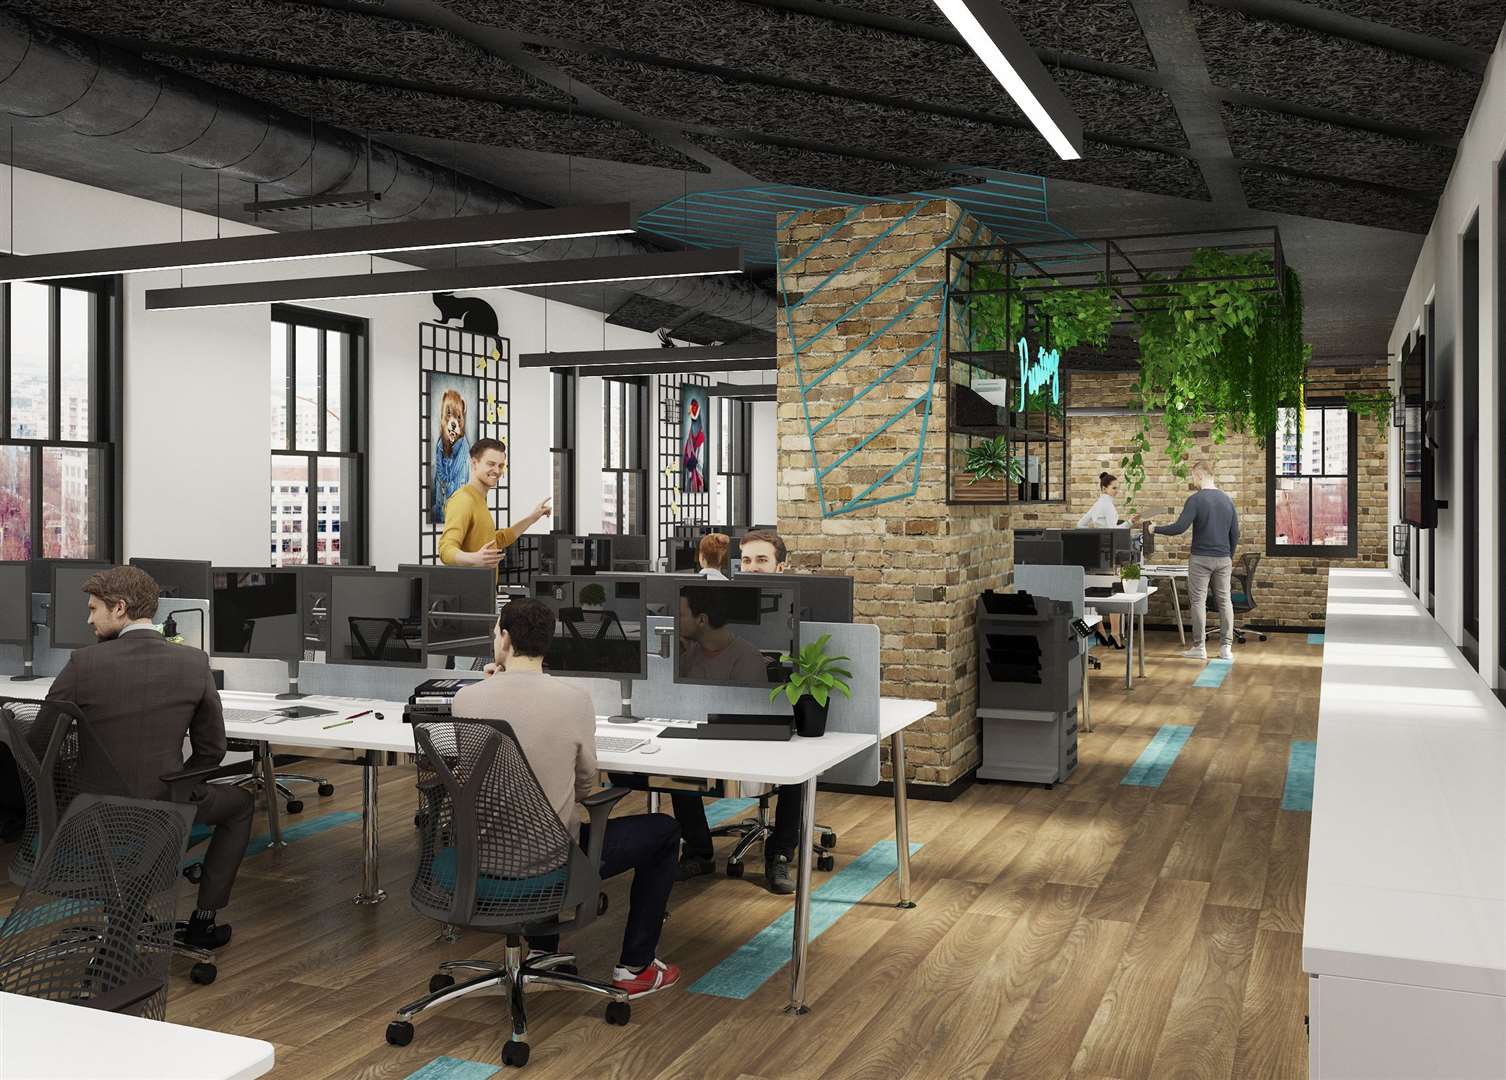 New co-working spaces such as these at Dartford's 'mini Silicon valley' are changing the way we work and collaborate